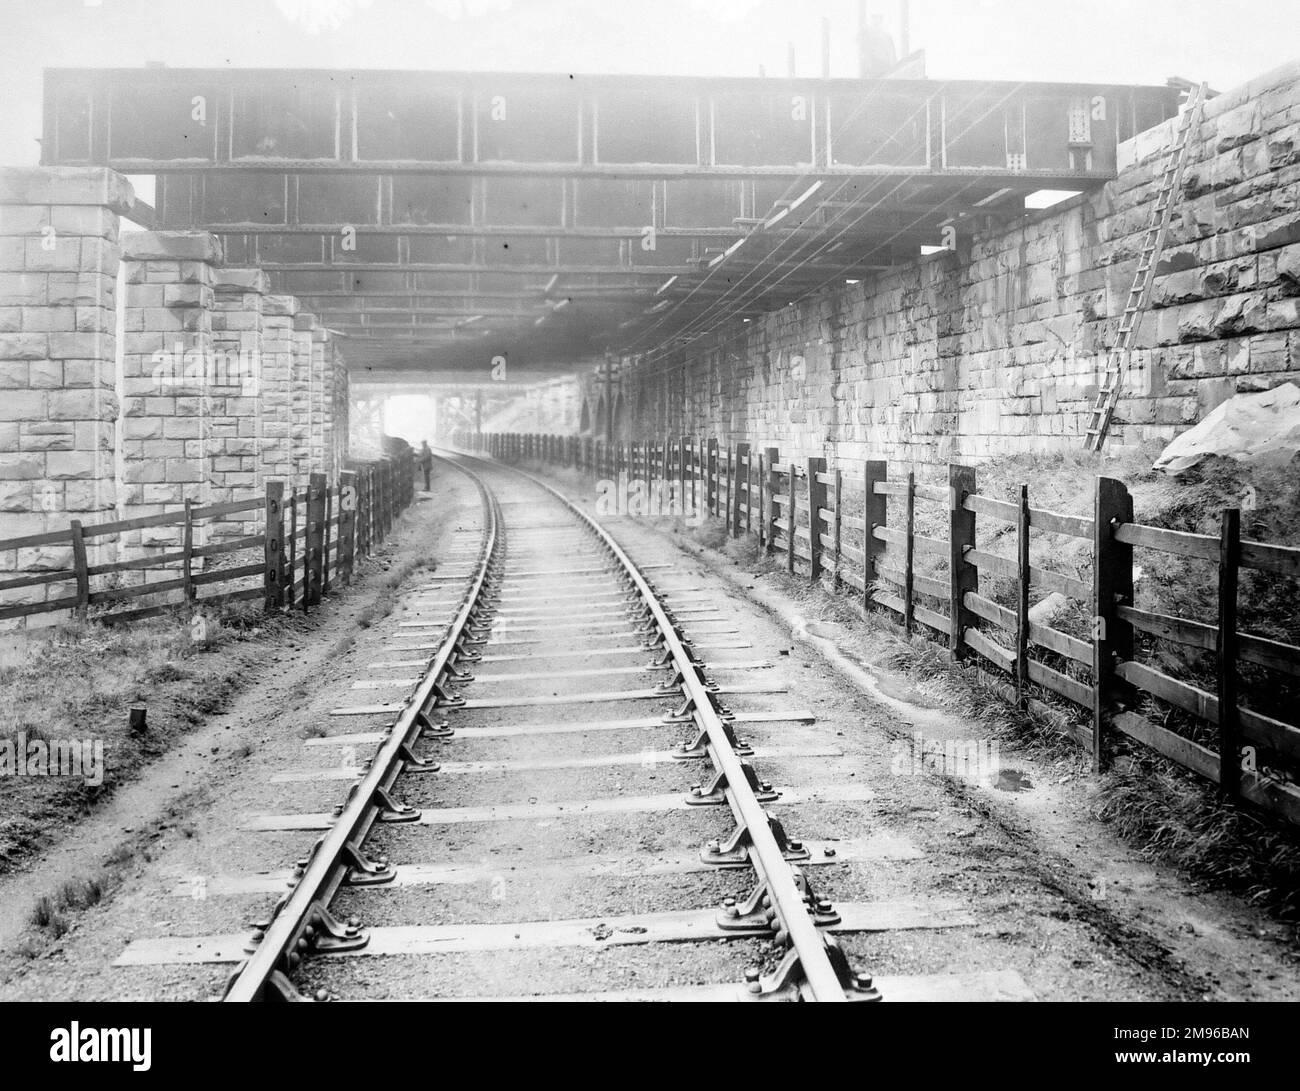 View of the railway track at Landore, near Swansea, on the Great Western Railway, Glamorgan, South Wales. Stock Photo